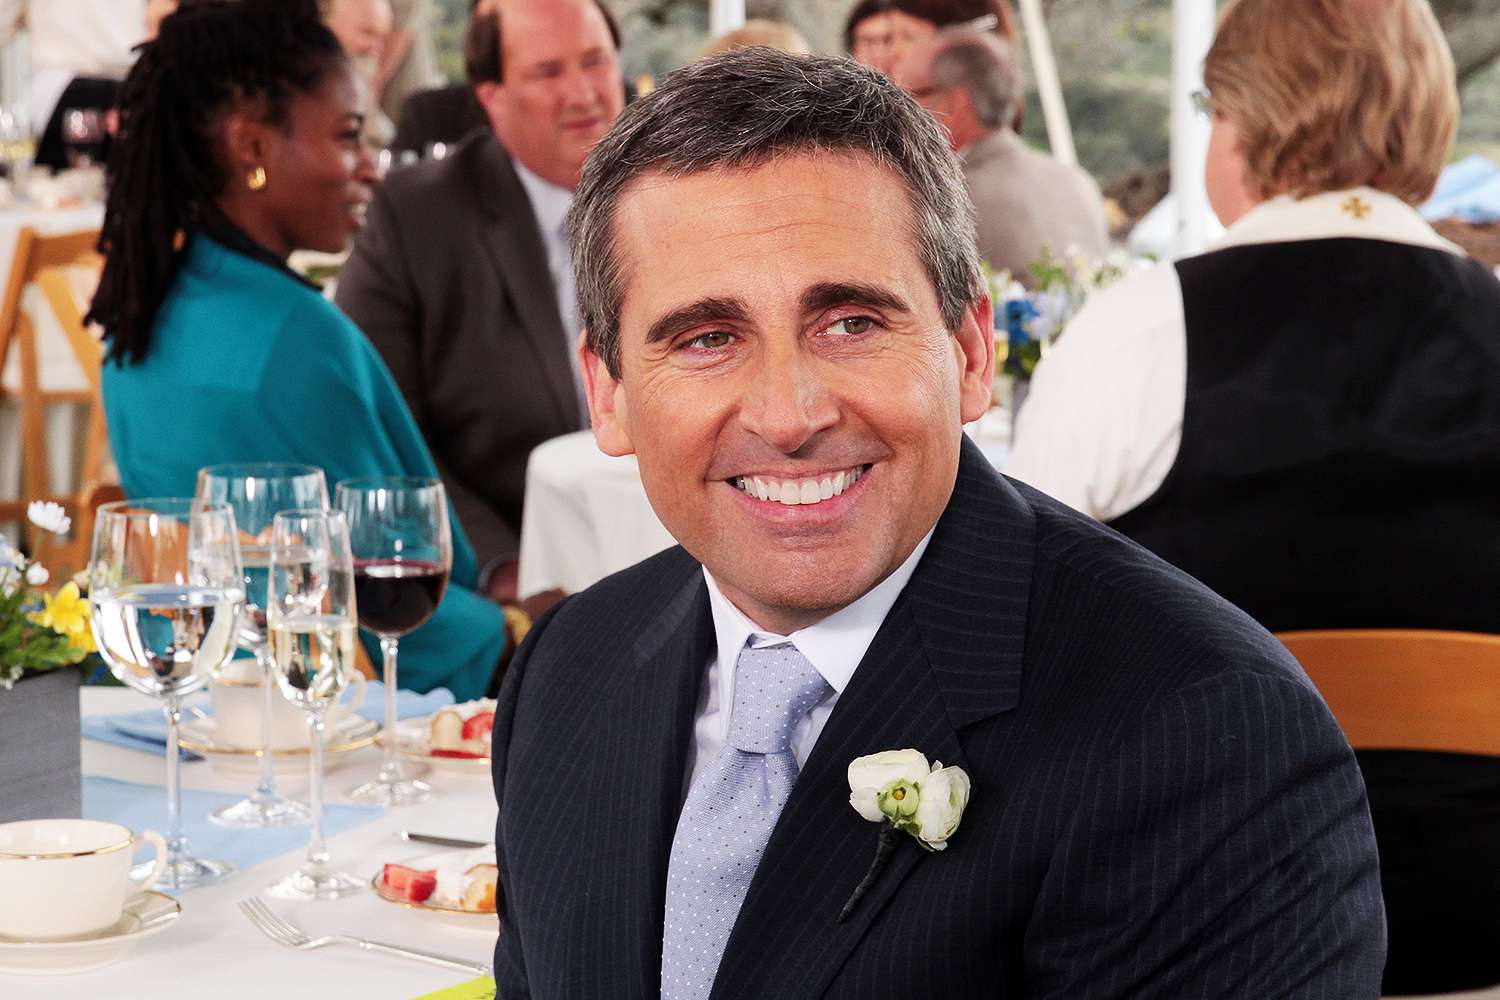 Steve Carell's Appearance in the Finale of 'The Office' 'Was a Big Reveal' — Even for the Cast: 'Swore Us to Secrecy'